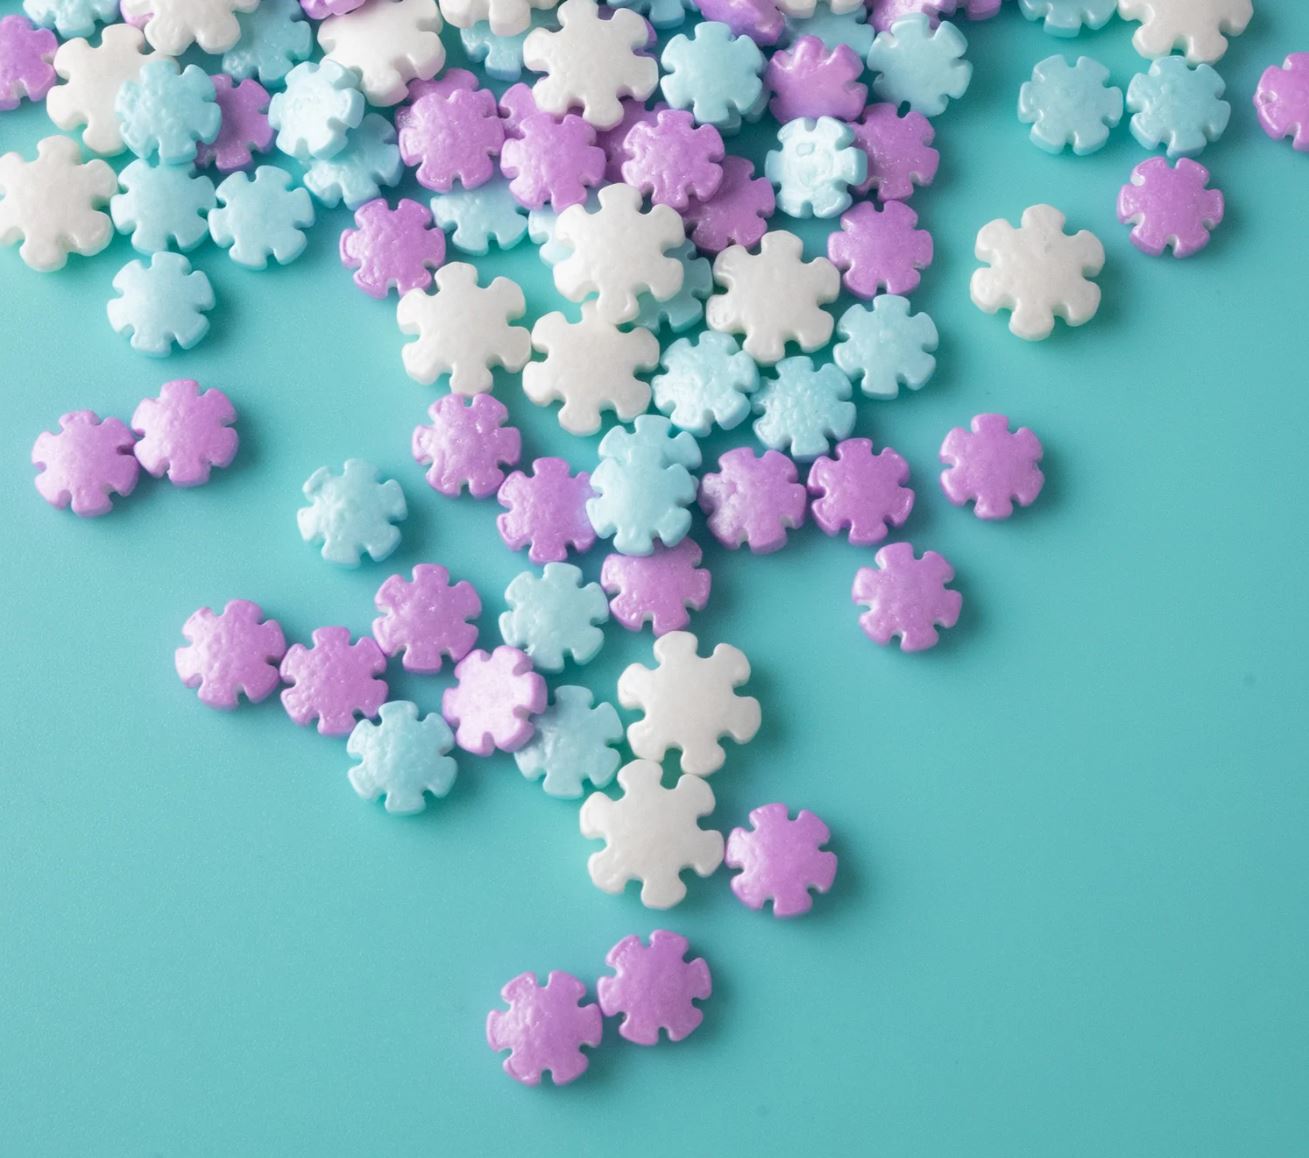 Snowflakes Candy Topping